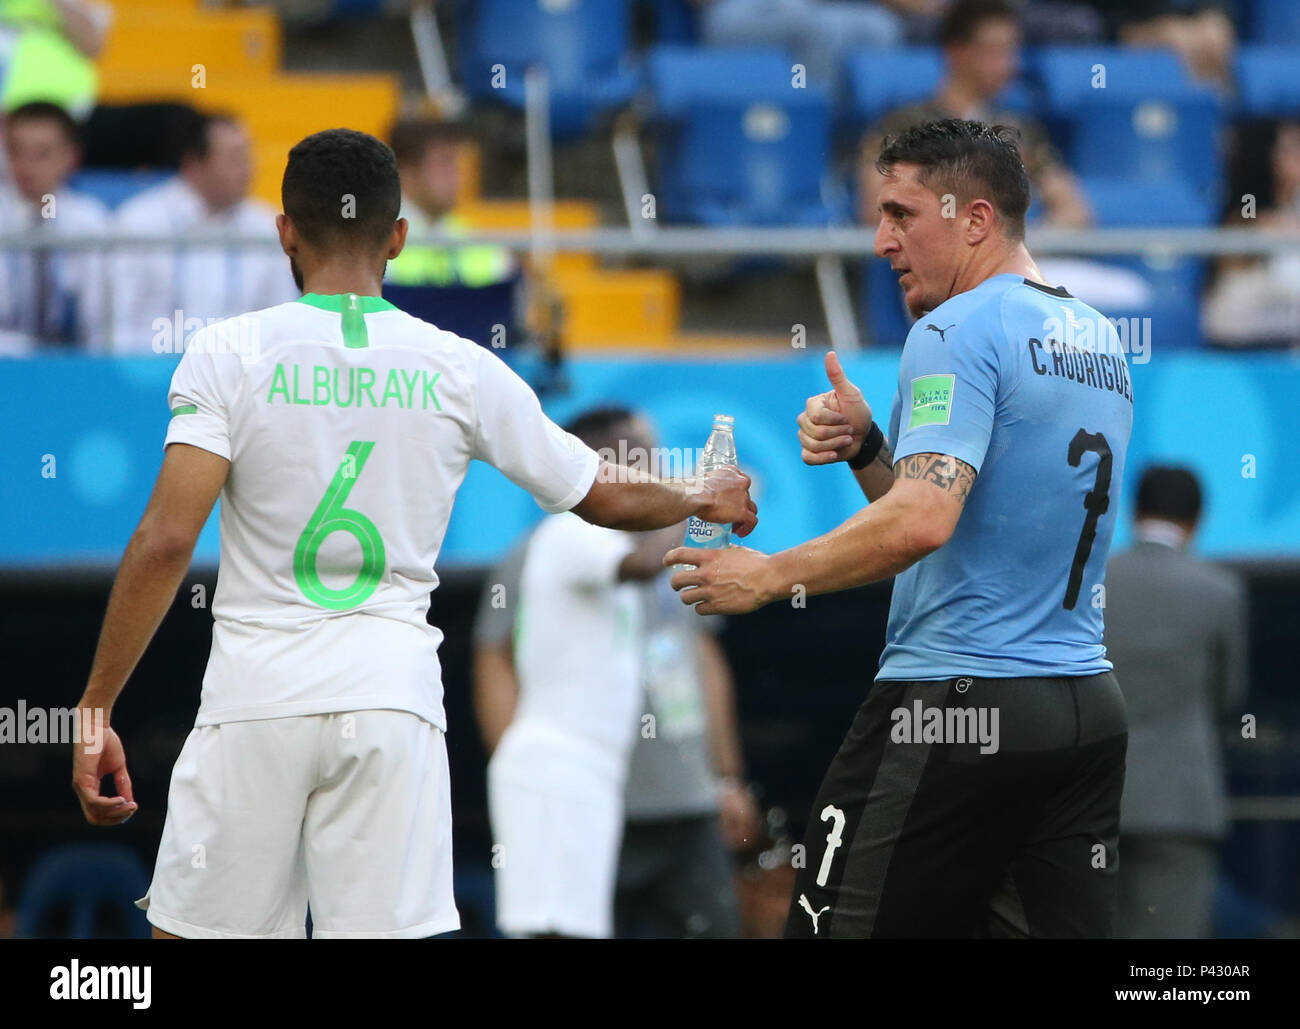 Rostov On Don. 20th June, 2018. Mohammed Alburayk (L) of Saudi Arabia passes a bottle of water to Cristian Rodriguez of Uruguay during a Group A match between Uruguay and Saudi Arabia at the 2018 FIFA World Cup in Rostov-on-Don, Russia, June 20, 2018. Credit: Li Ming/Xinhua/Alamy Live News Stock Photo